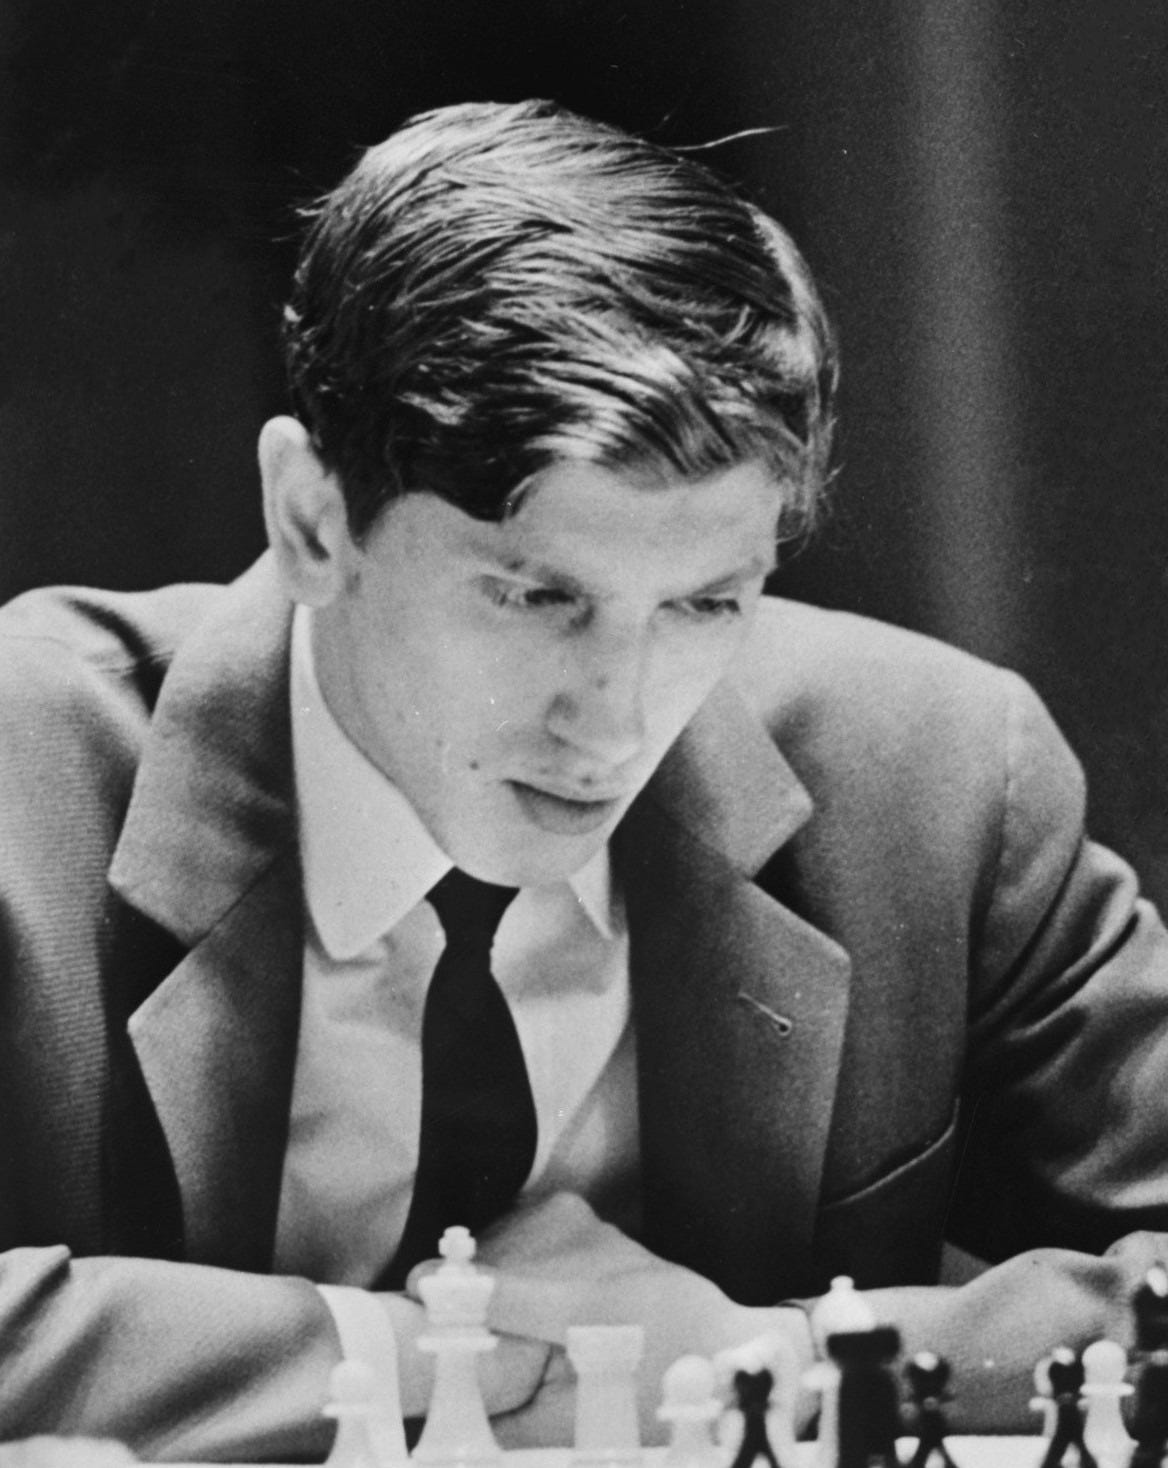 What is the minimum Fide rating to be considered a chess grandmaster? -  Quora